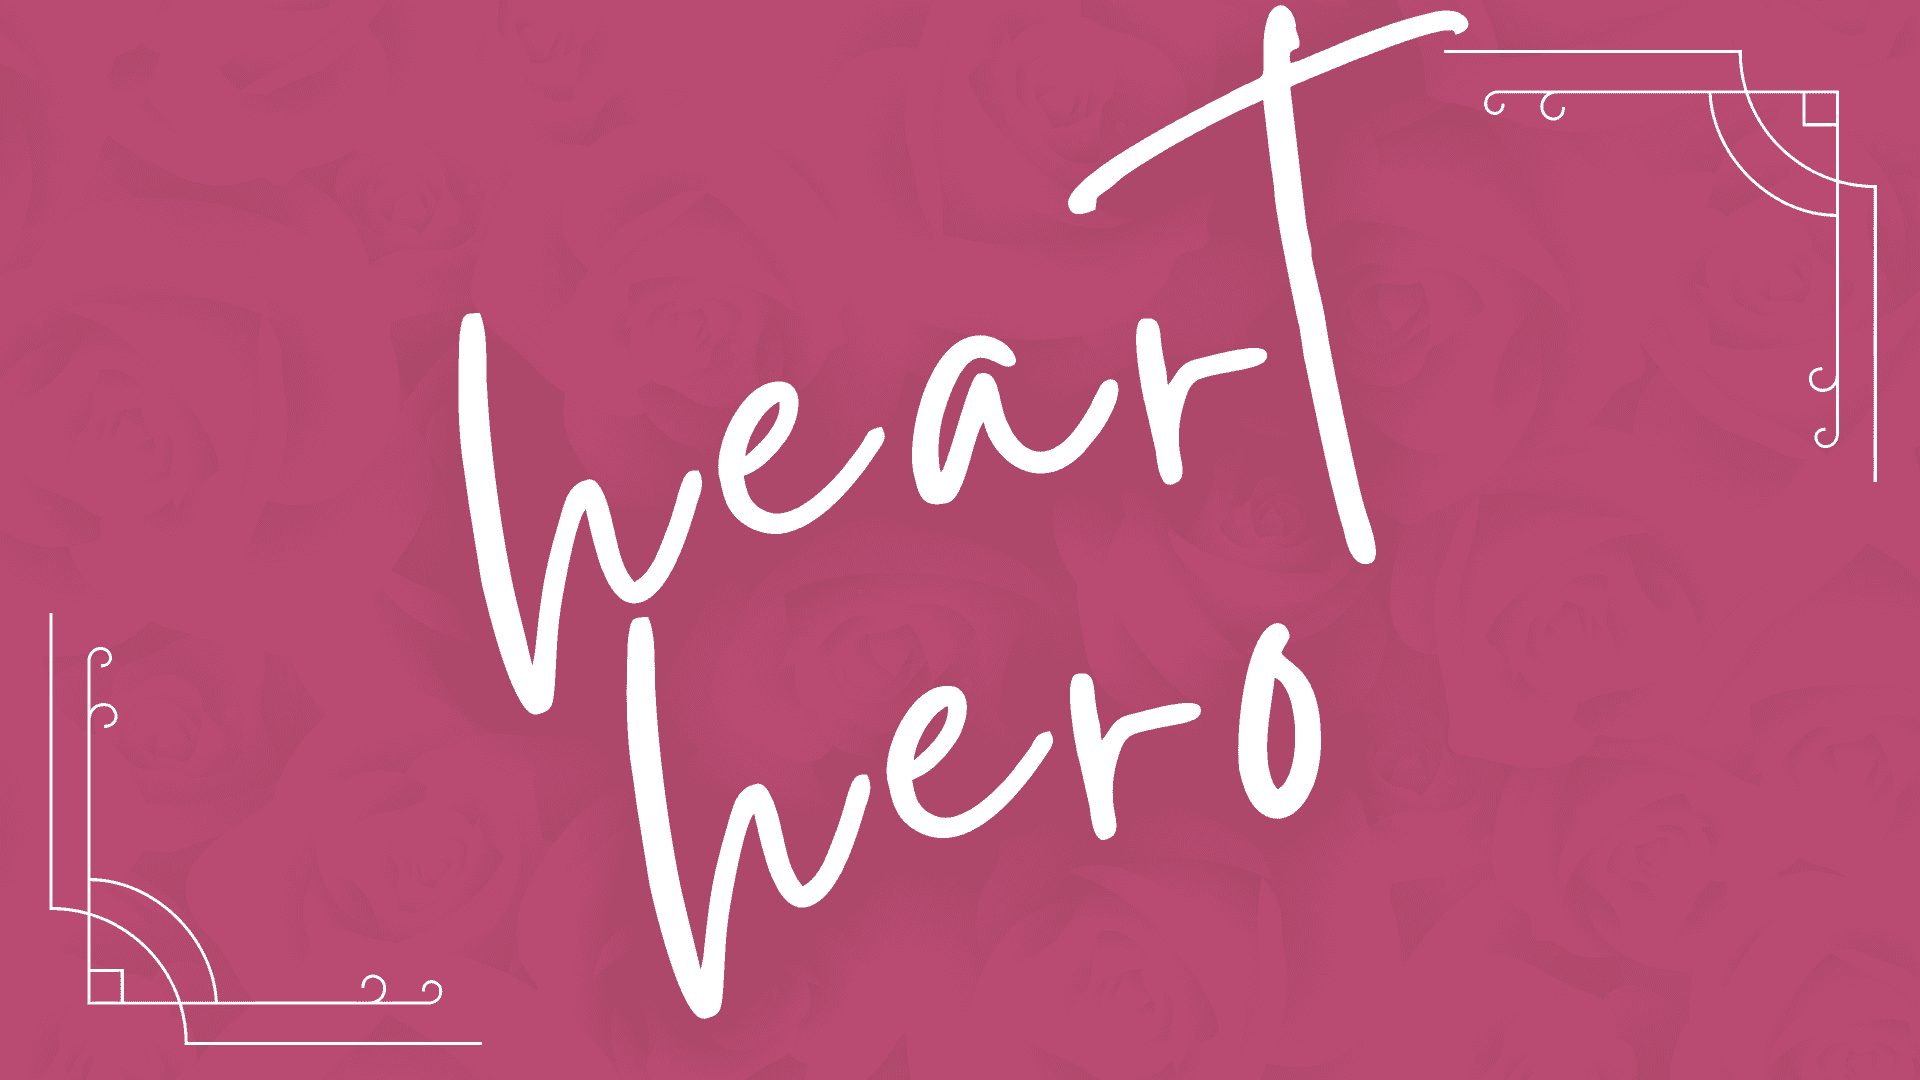 Heart Hero supporting image.